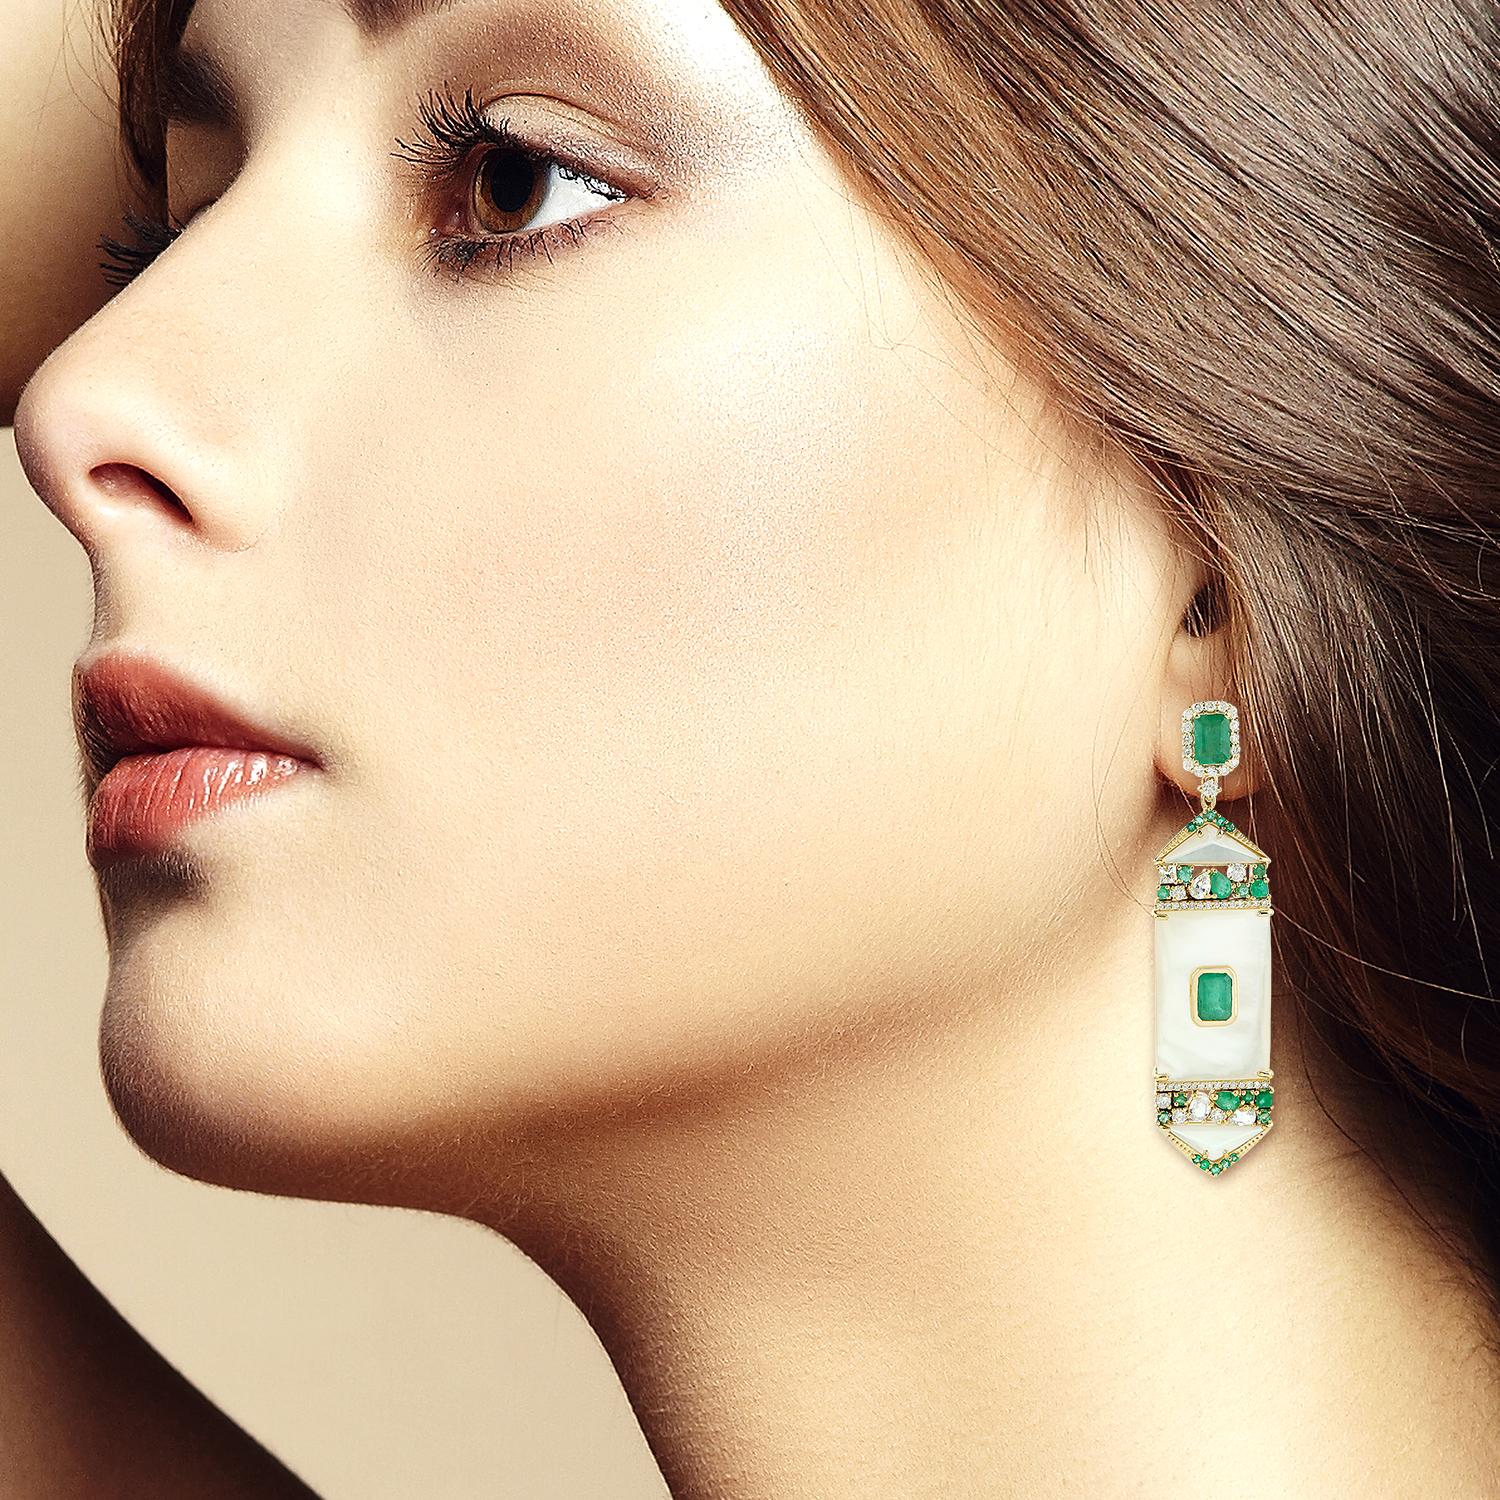 Cast from 14-karat gold, these stunning earrings are hand set with 6.02 carats Emerald, 22.4 carats mother of pearl and 1.52 carats of glimmering diamonds. 

FOLLOW  MEGHNA JEWELS storefront to view the latest collection & exclusive pieces.  Meghna